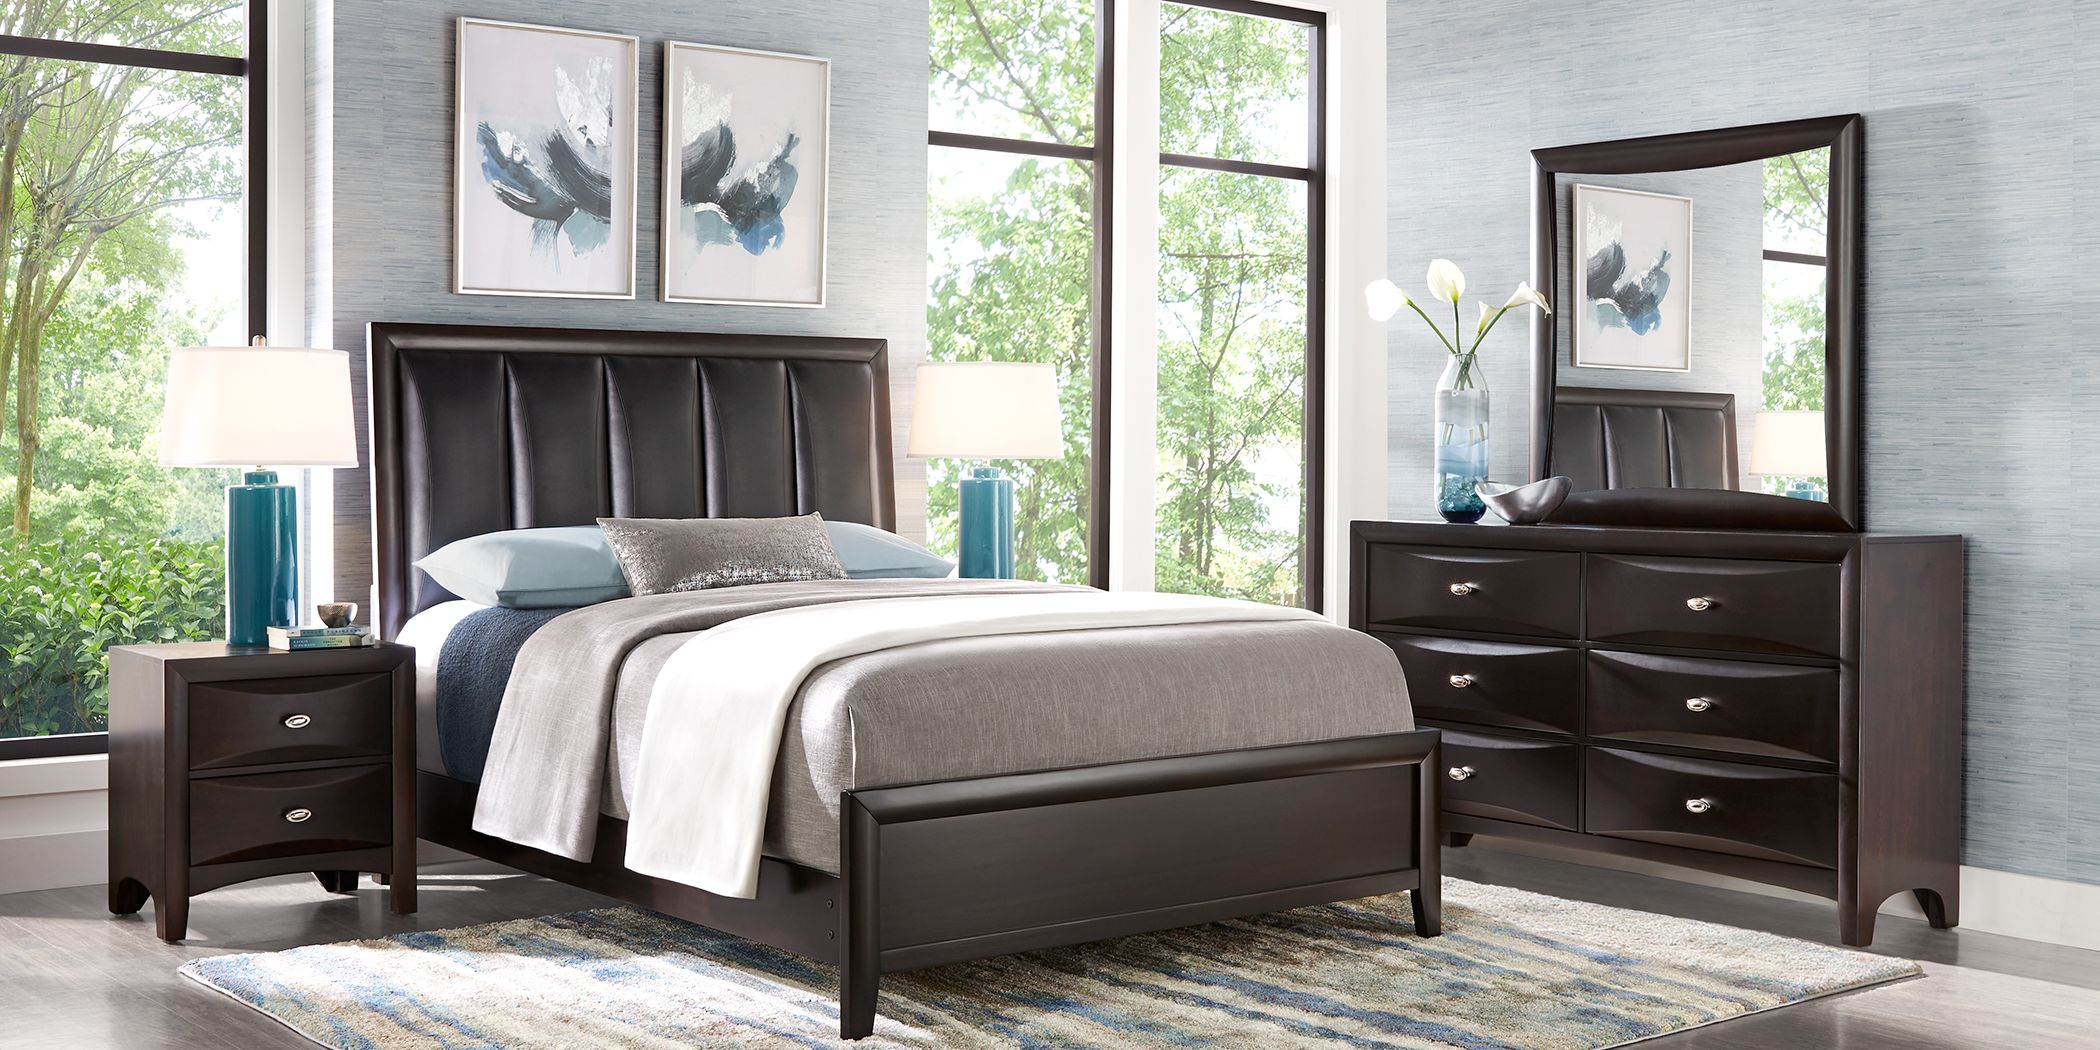 Rooms To Go Kids Austin - Affordable Furniture Store Home Furniture For Less Online / 113 likes